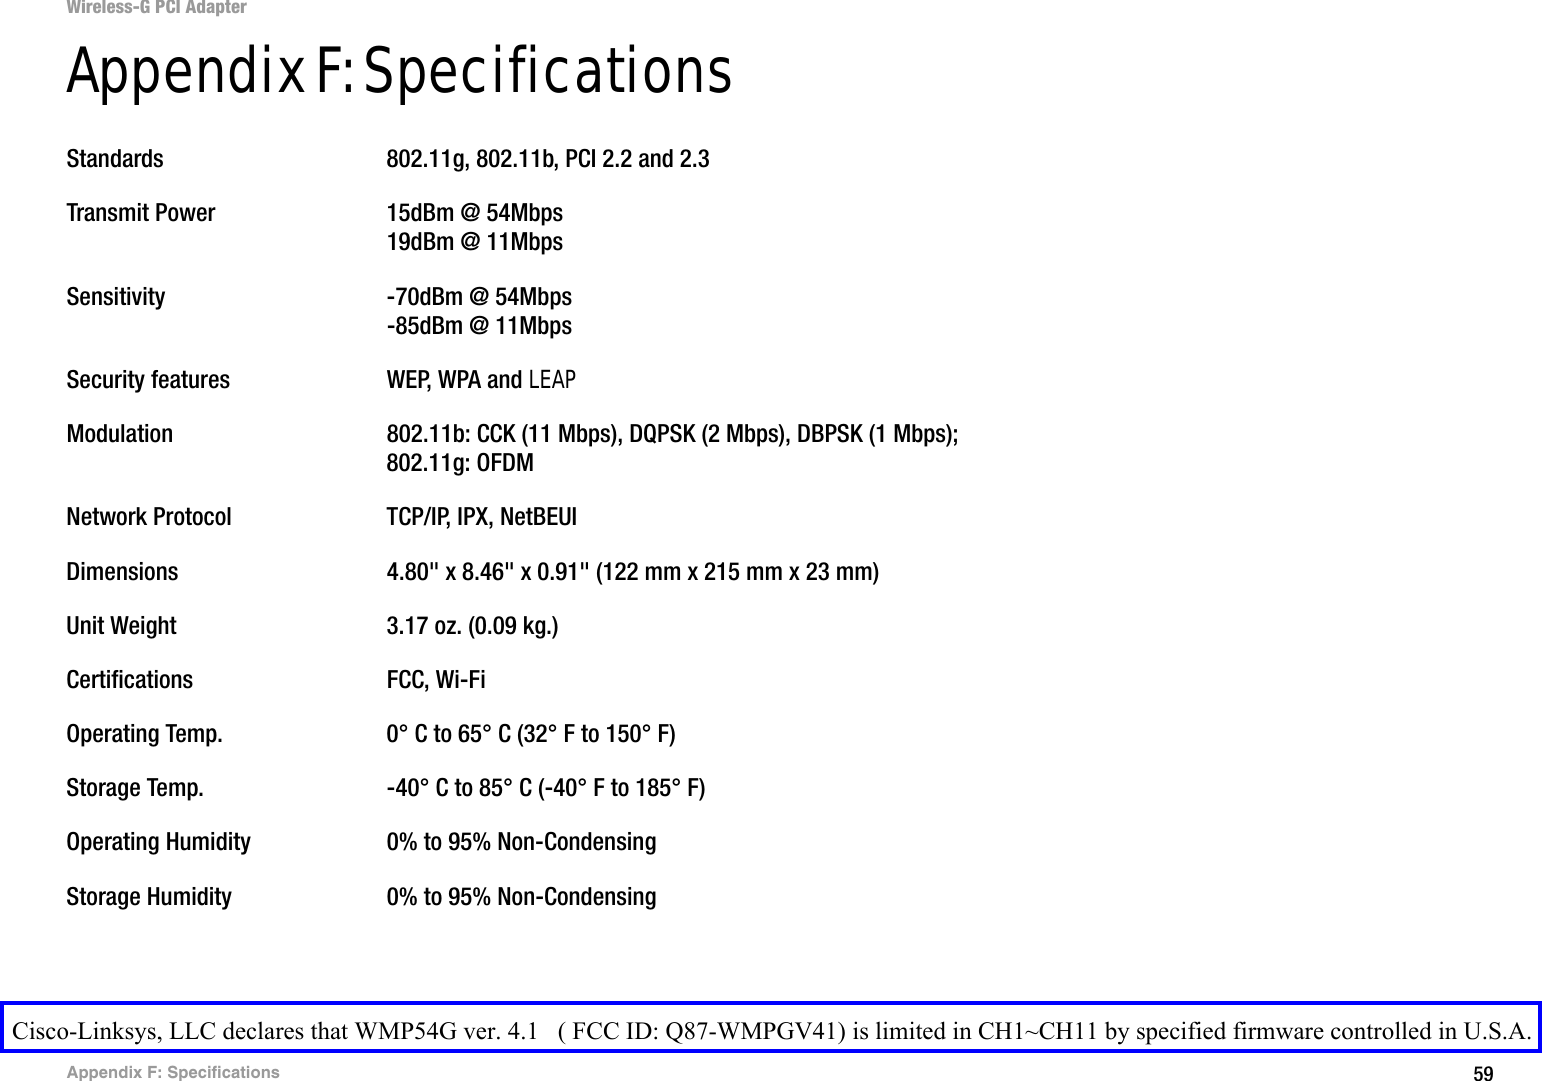 59Appendix F: SpecificationsWireless-G PCI AdapterAppendix F: SpecificationsStandards 802.11g, 802.11b, PCI 2.2 and 2.3Transmit Power 15dBm @ 54Mbps19dBm @ 11MbpsSensitivity -70dBm @ 54Mbps-85dBm @ 11MbpsSecurity features WEP, WPA and LEAPModulation 802.11b: CCK (11 Mbps), DQPSK (2 Mbps), DBPSK (1 Mbps); 802.11g: OFDMNetwork Protocol TCP/IP, IPX, NetBEUIDimensions  4.80&quot; x 8.46&quot; x 0.91&quot; (122 mm x 215 mm x 23 mm)Unit Weight 3.17 oz. (0.09 kg.)Certifications FCC, Wi-FiOperating Temp. 0° C to 65° C (32° F to 150° F)Storage Temp. -40° C to 85° C (-40° F to 185° F)Operating Humidity 0% to 95% Non-CondensingStorage Humidity 0% to 95% Non-CondensingCisco-Linksys, LLC declares that WMP54G ver. 4.1   ( FCC ID: Q87-WMPGV41) is limited in CH1~CH11 by specified firmware controlled in U.S.A.